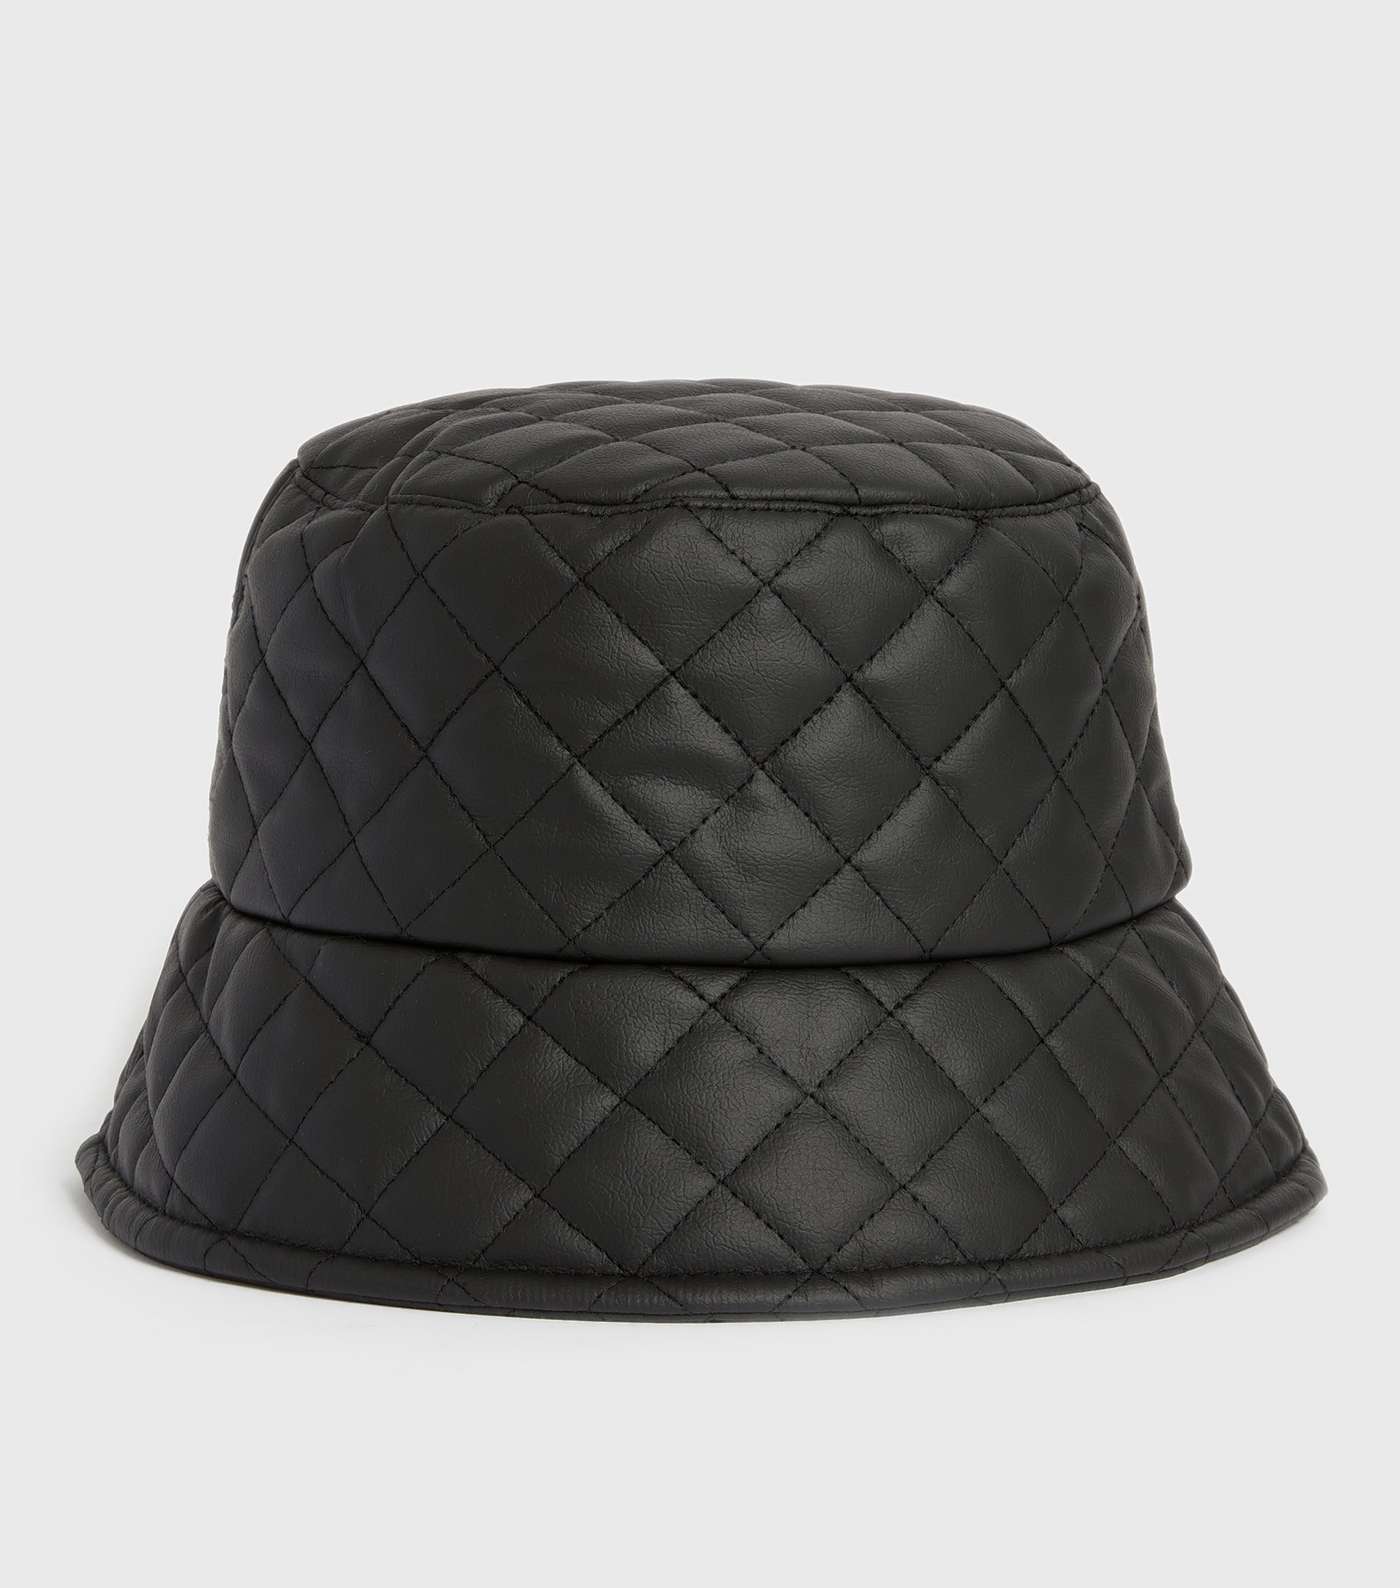 Black Quilted Leather-Look Bucket Hat Image 2